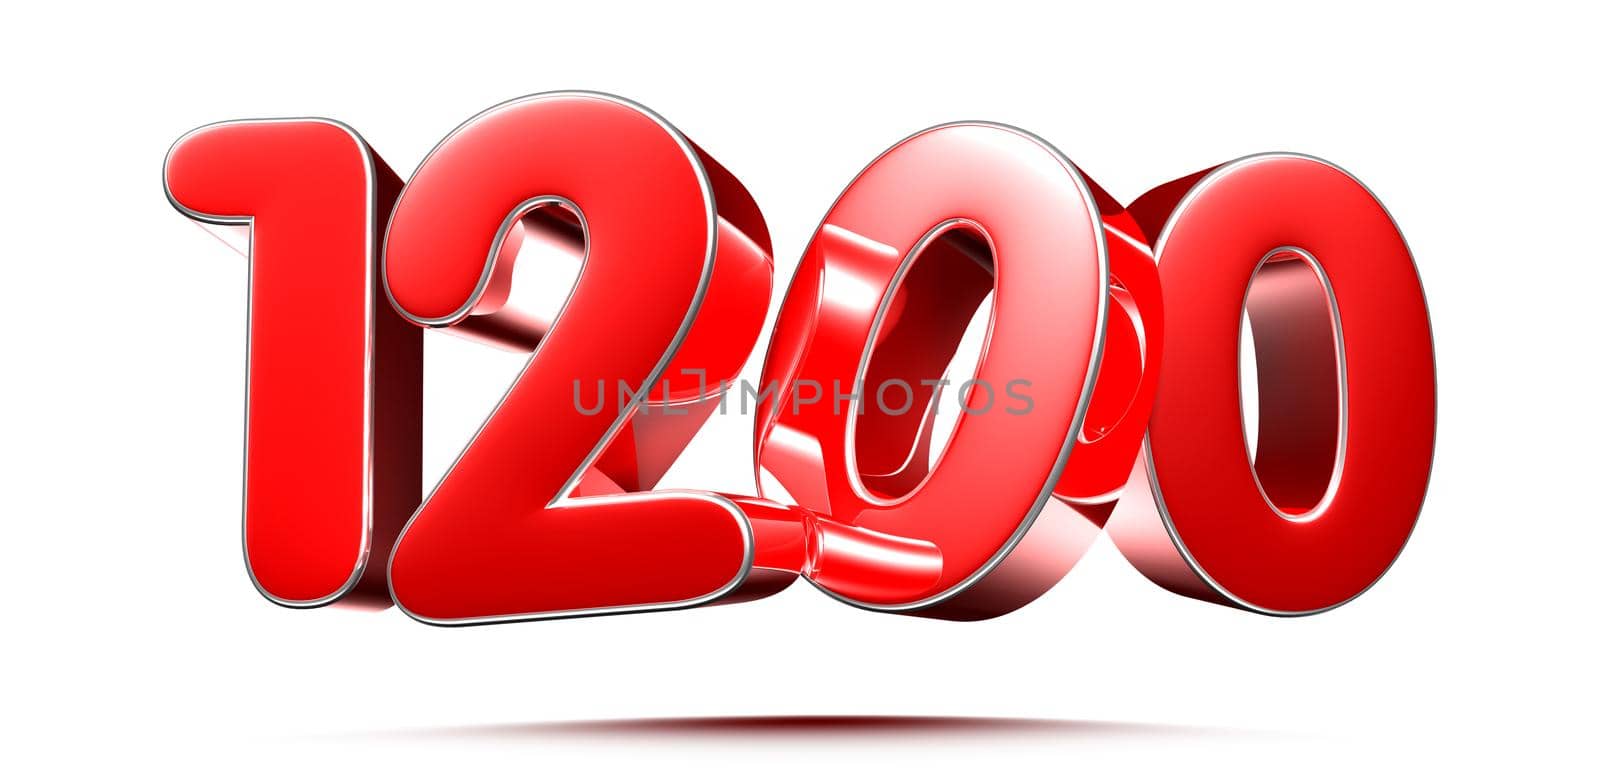 Rounded red numbers 1200 on white background 3D illustration with clipping path